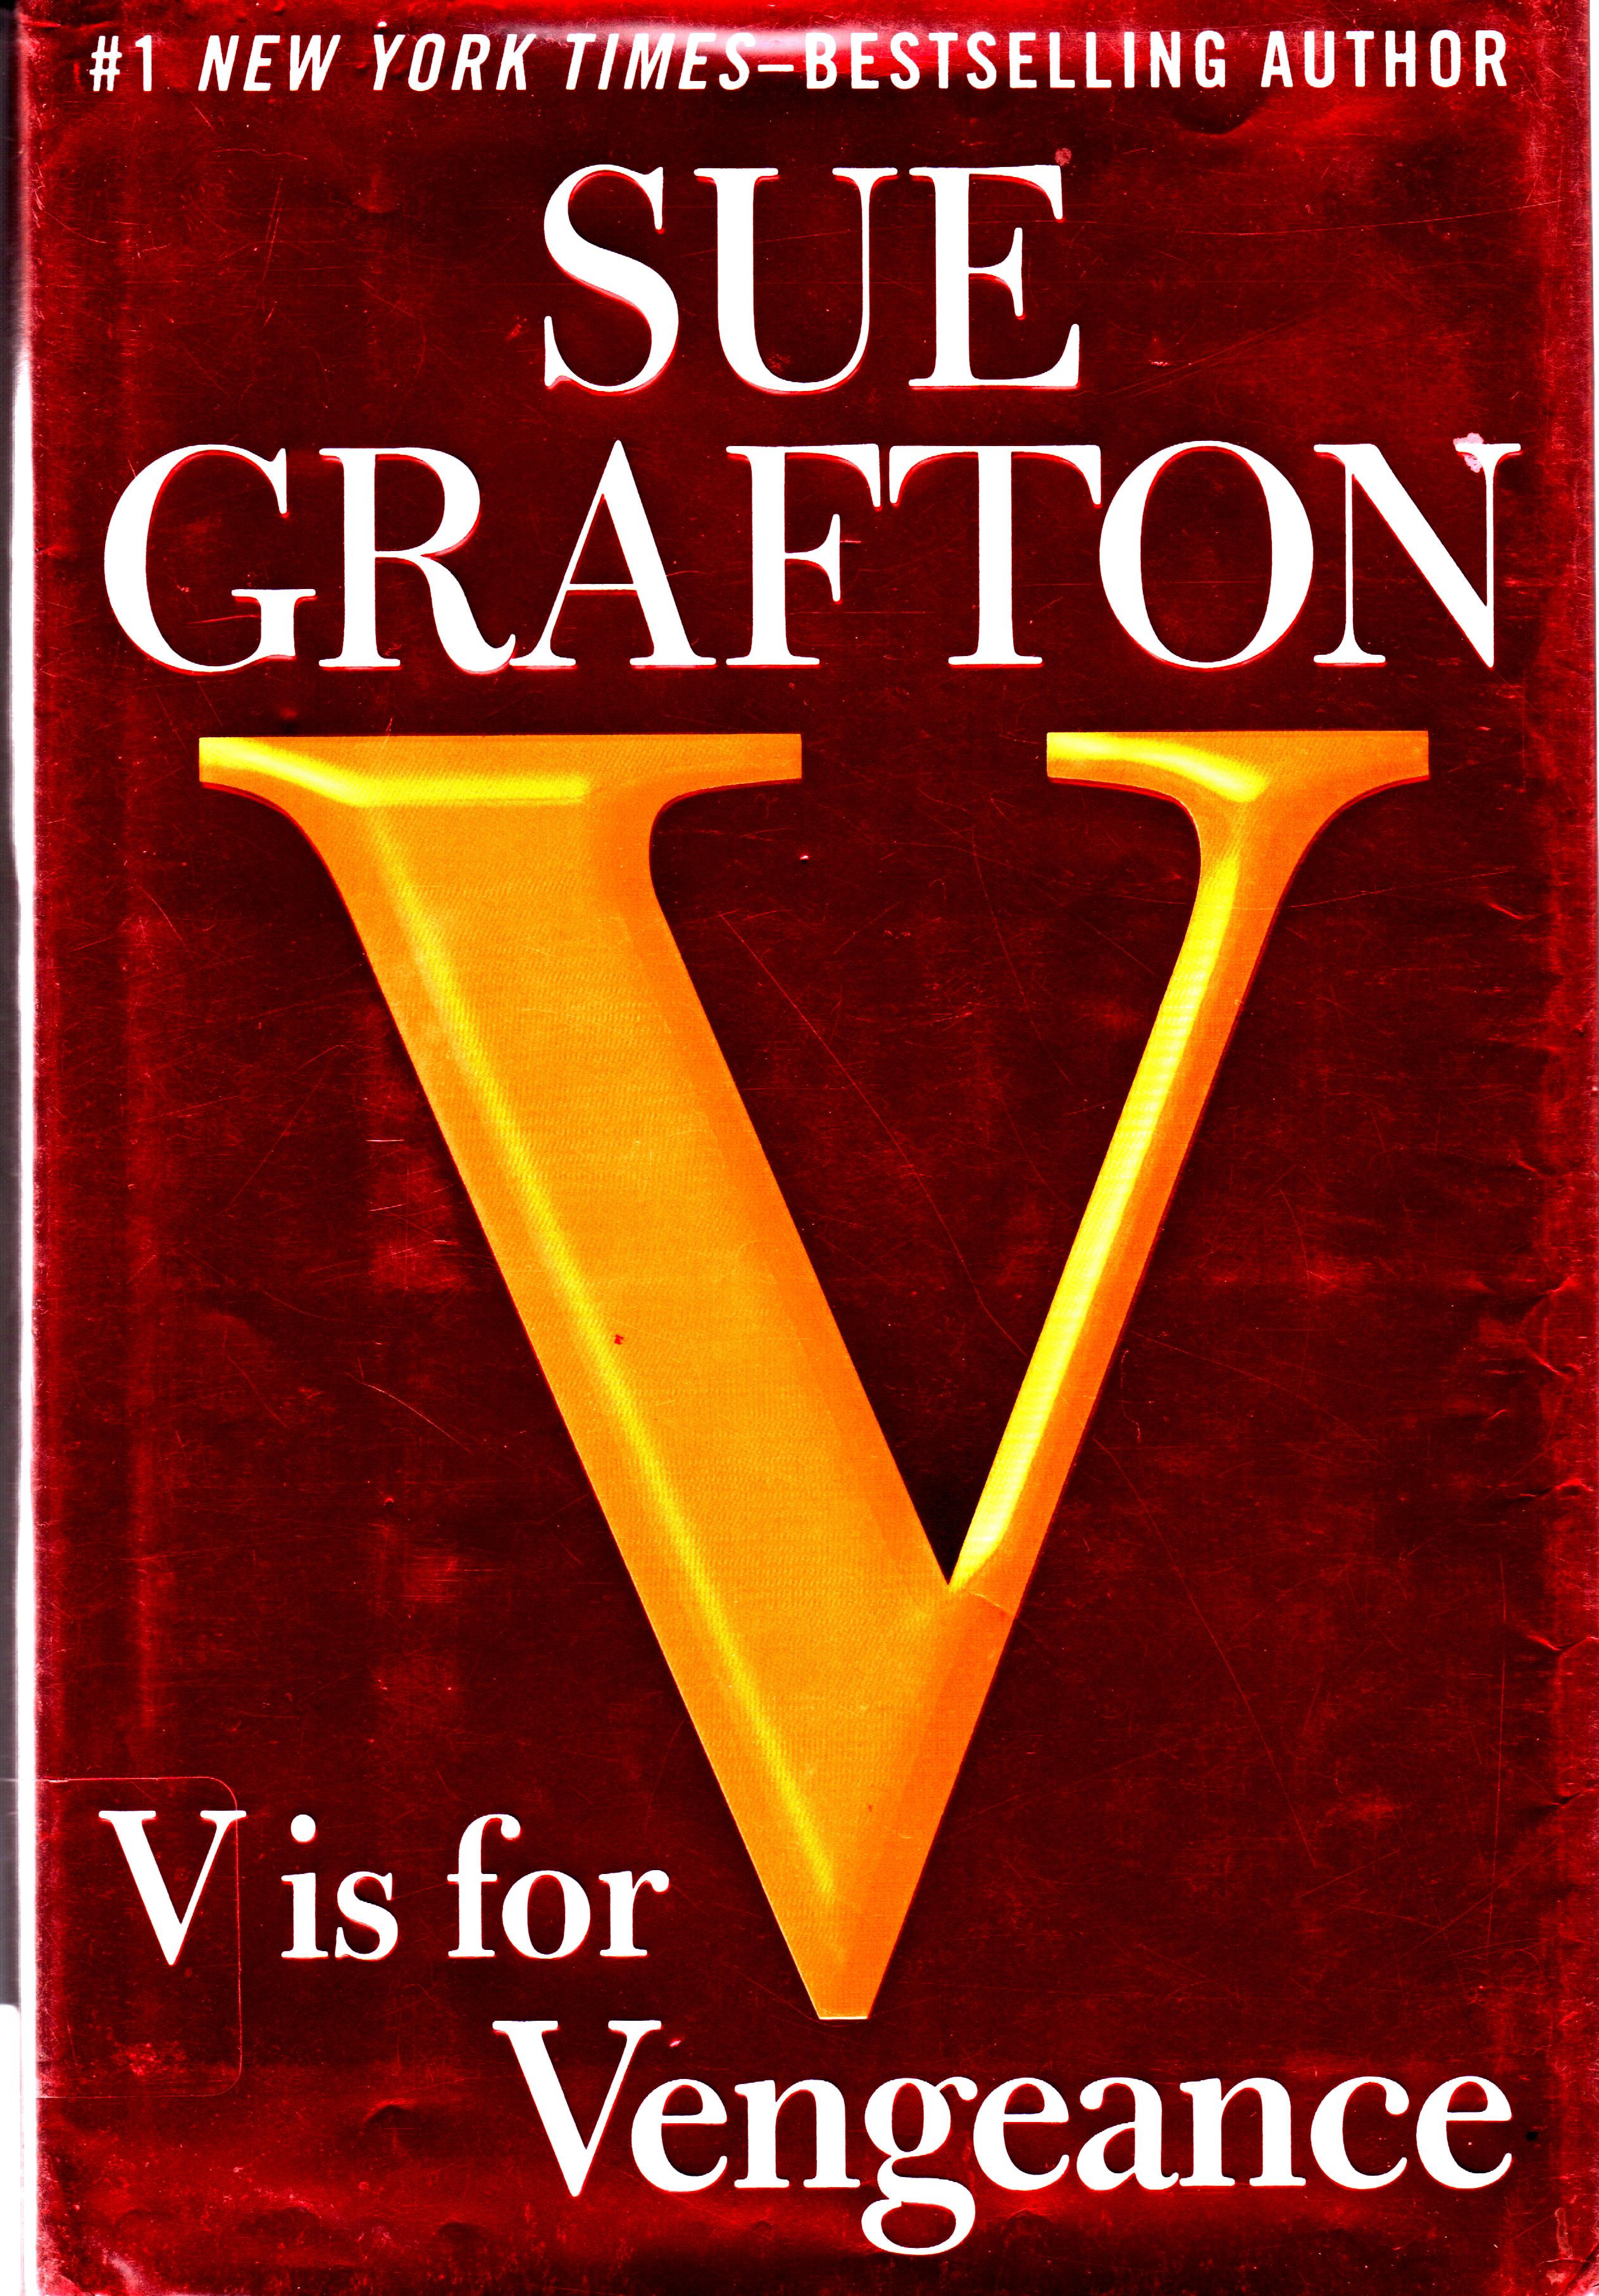 Are Sue Grafton books appropriate for younger readers?